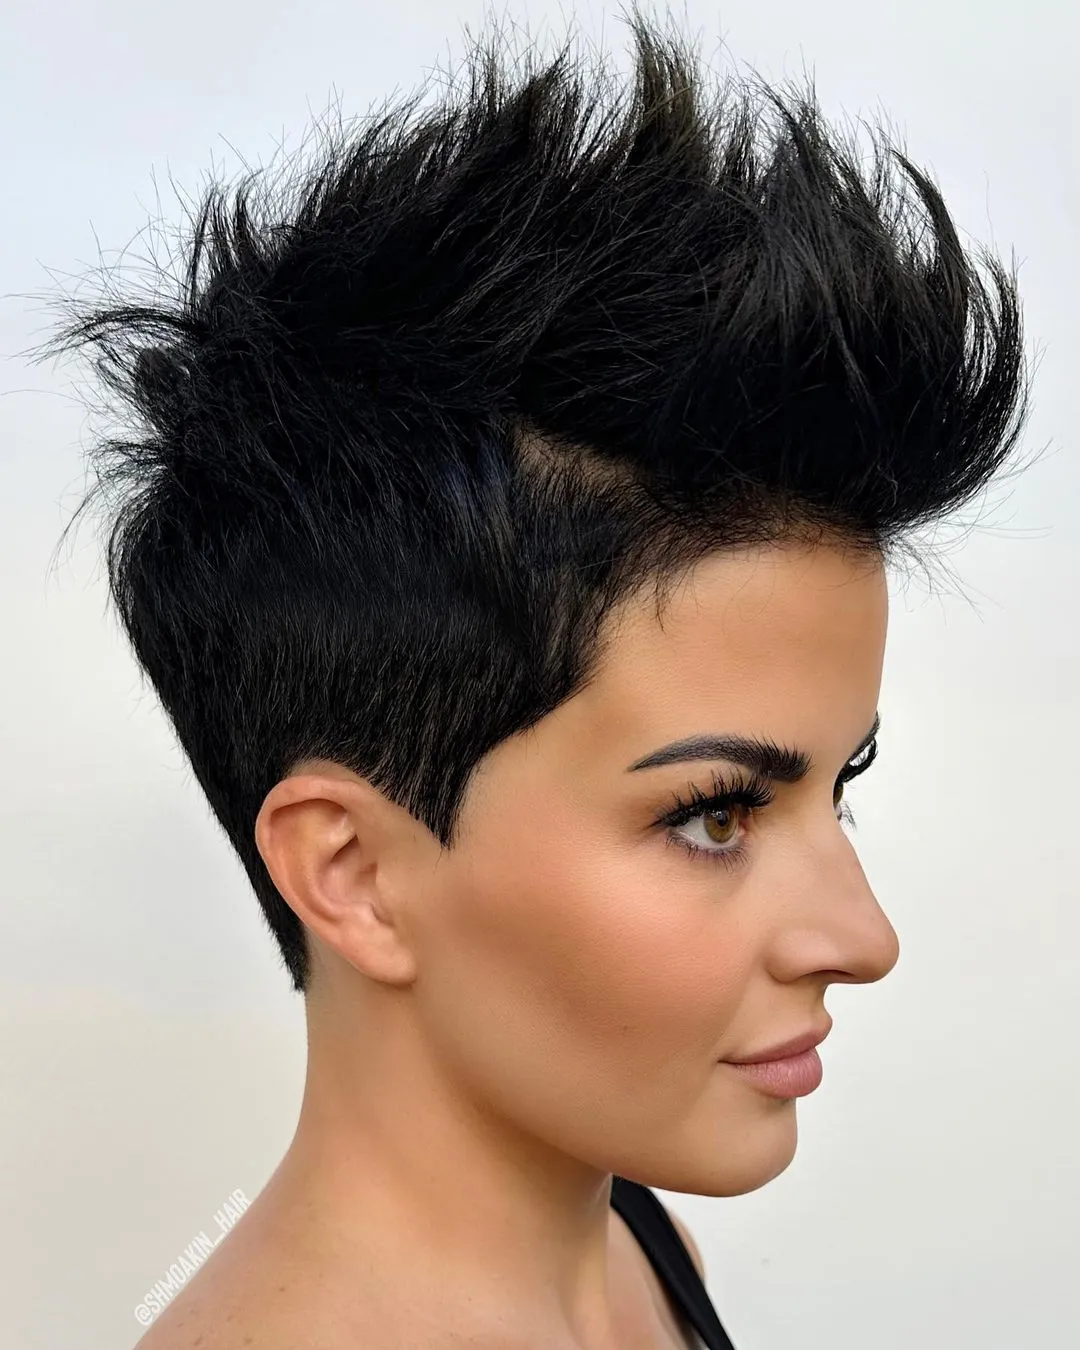 pixie-styled-with-high-textured-spikes